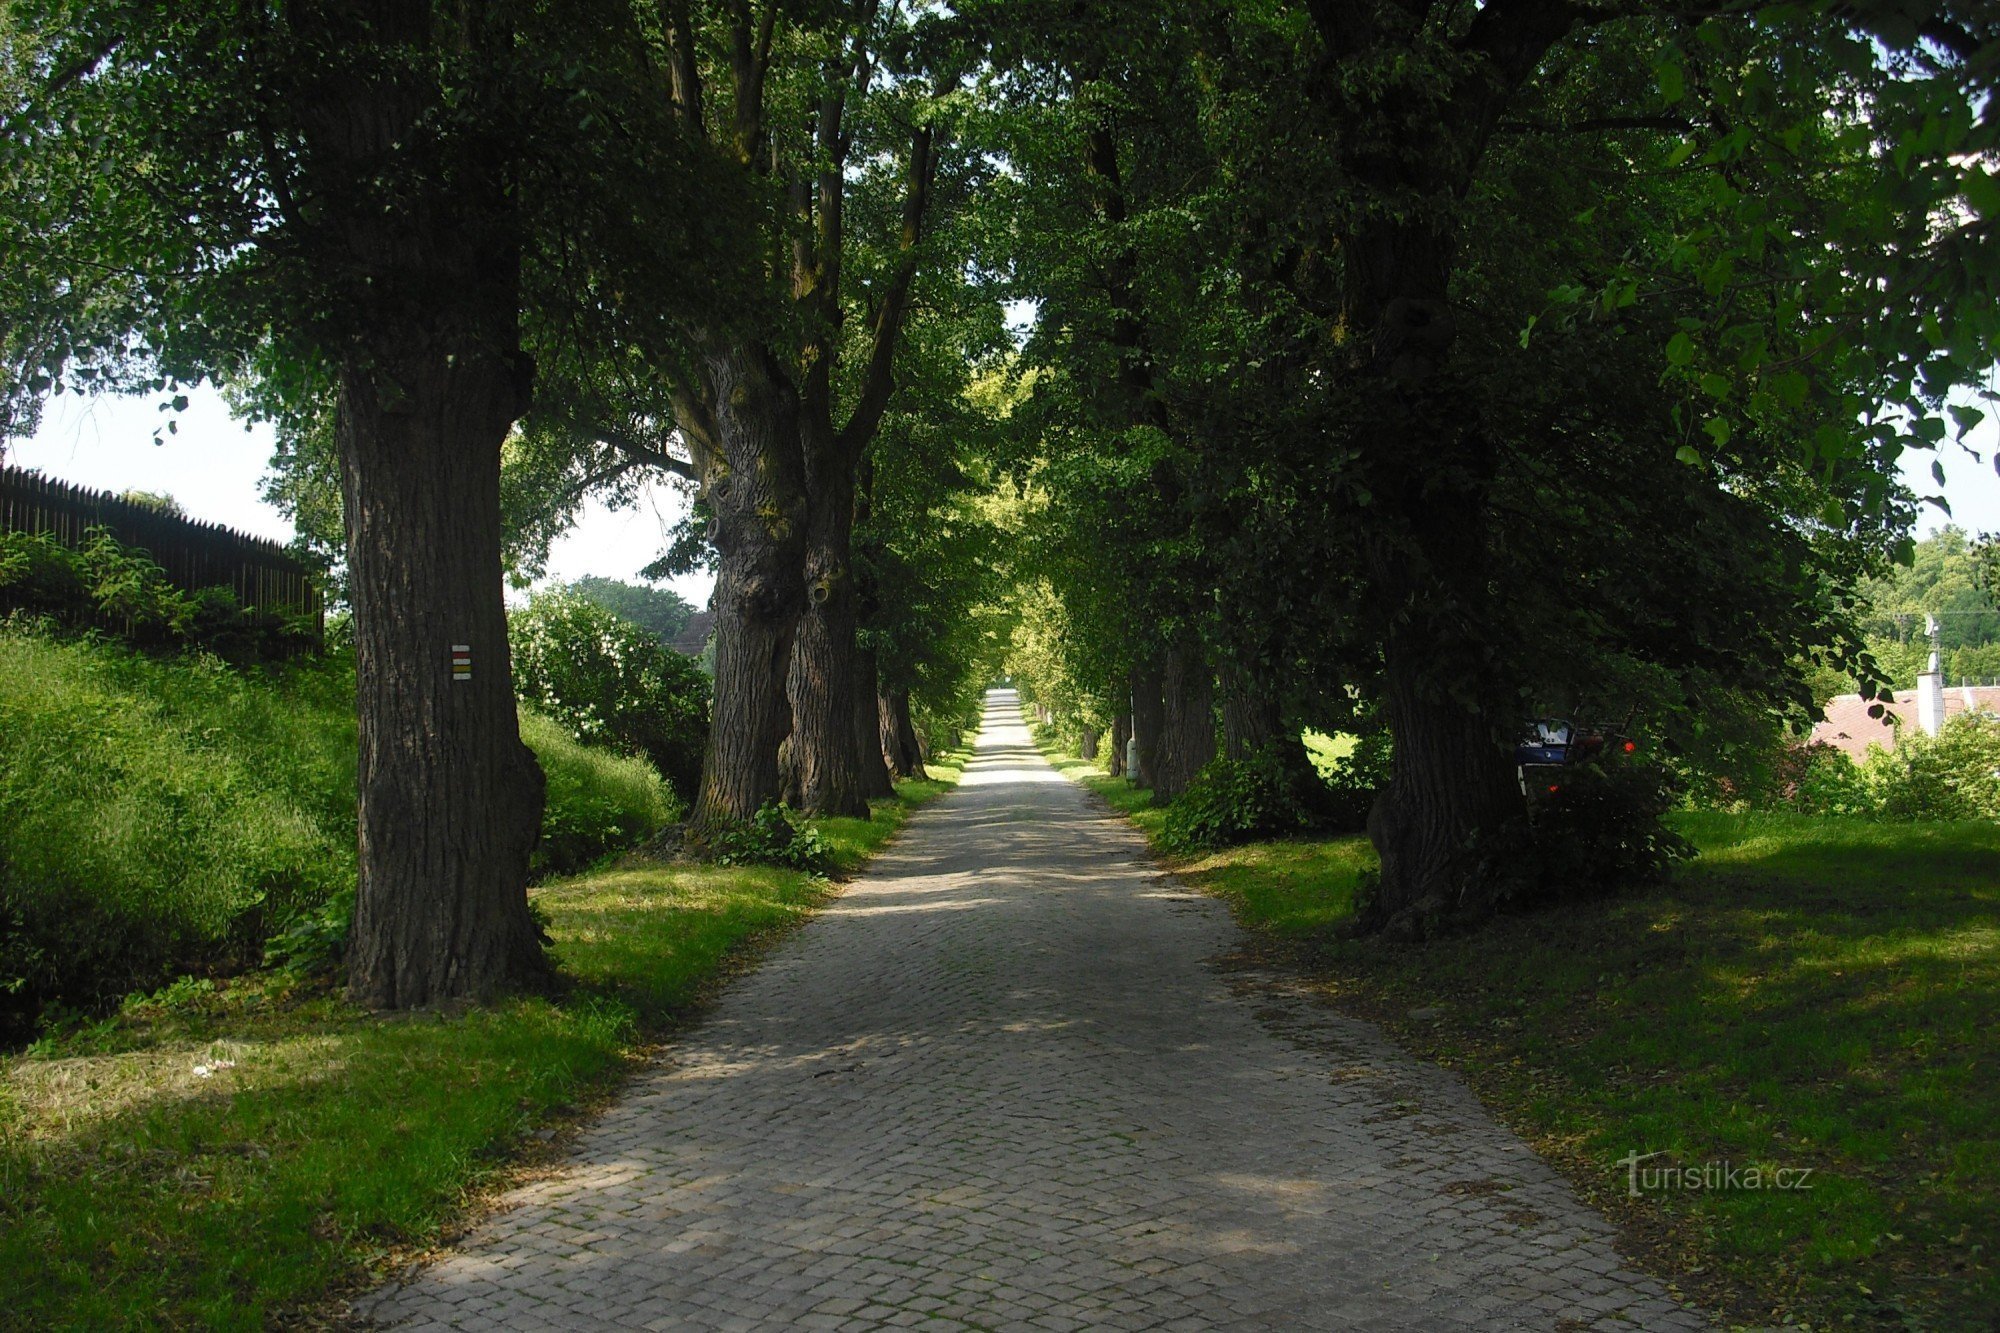 The castle path along the linden alley.